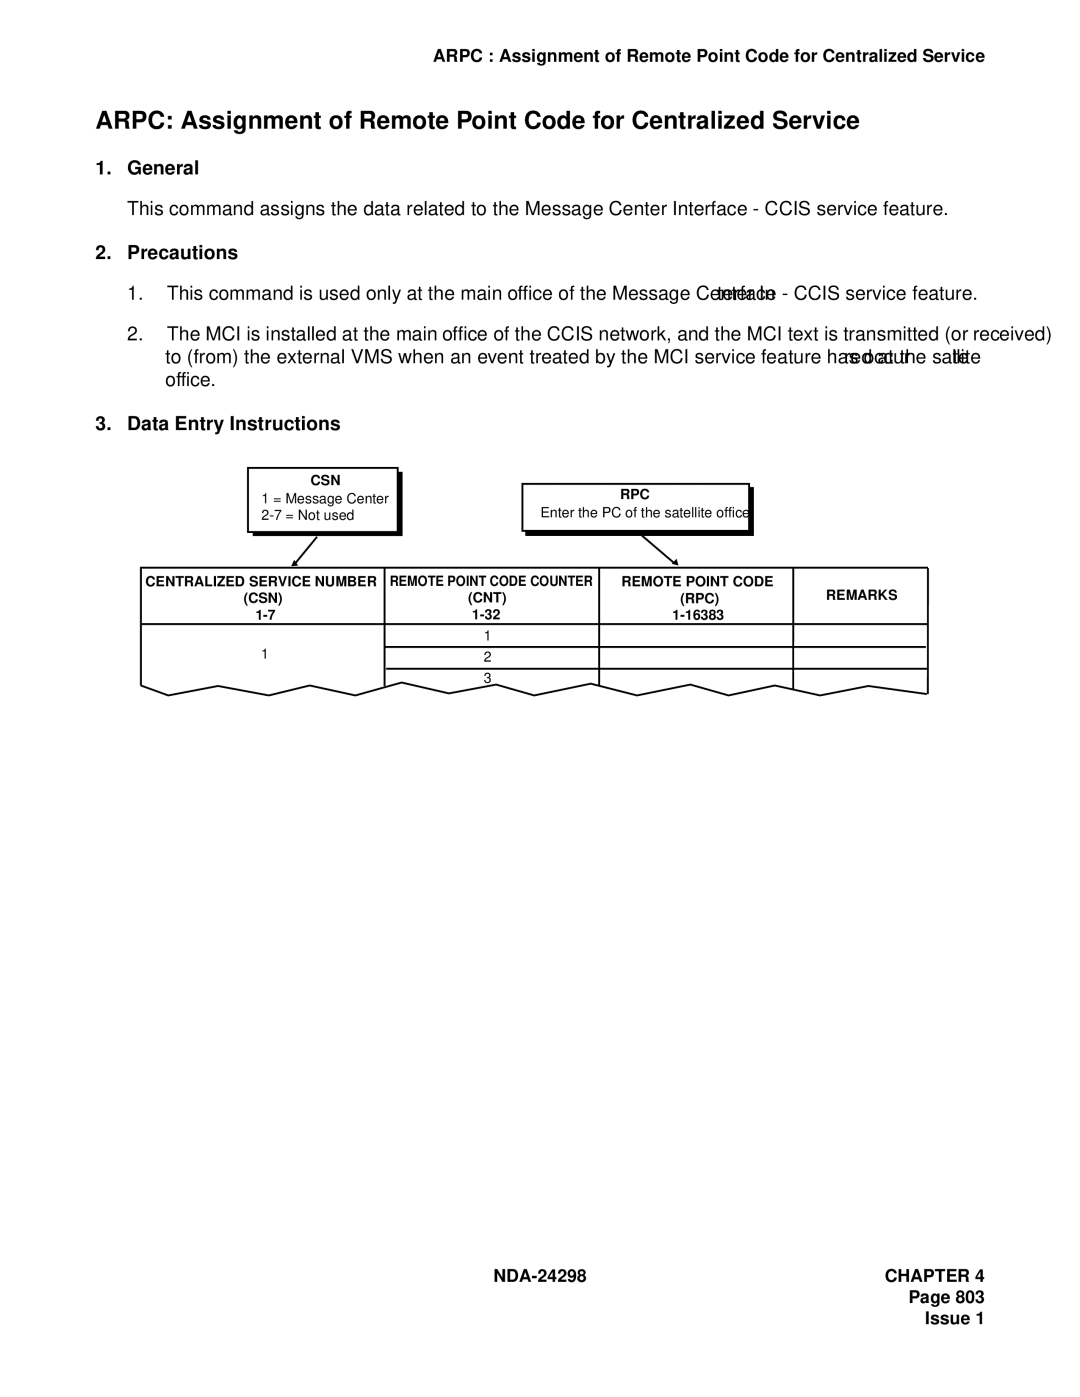 NEC NDA-24298 manual Arpc Assignment of Remote Point Code for Centralized Service 